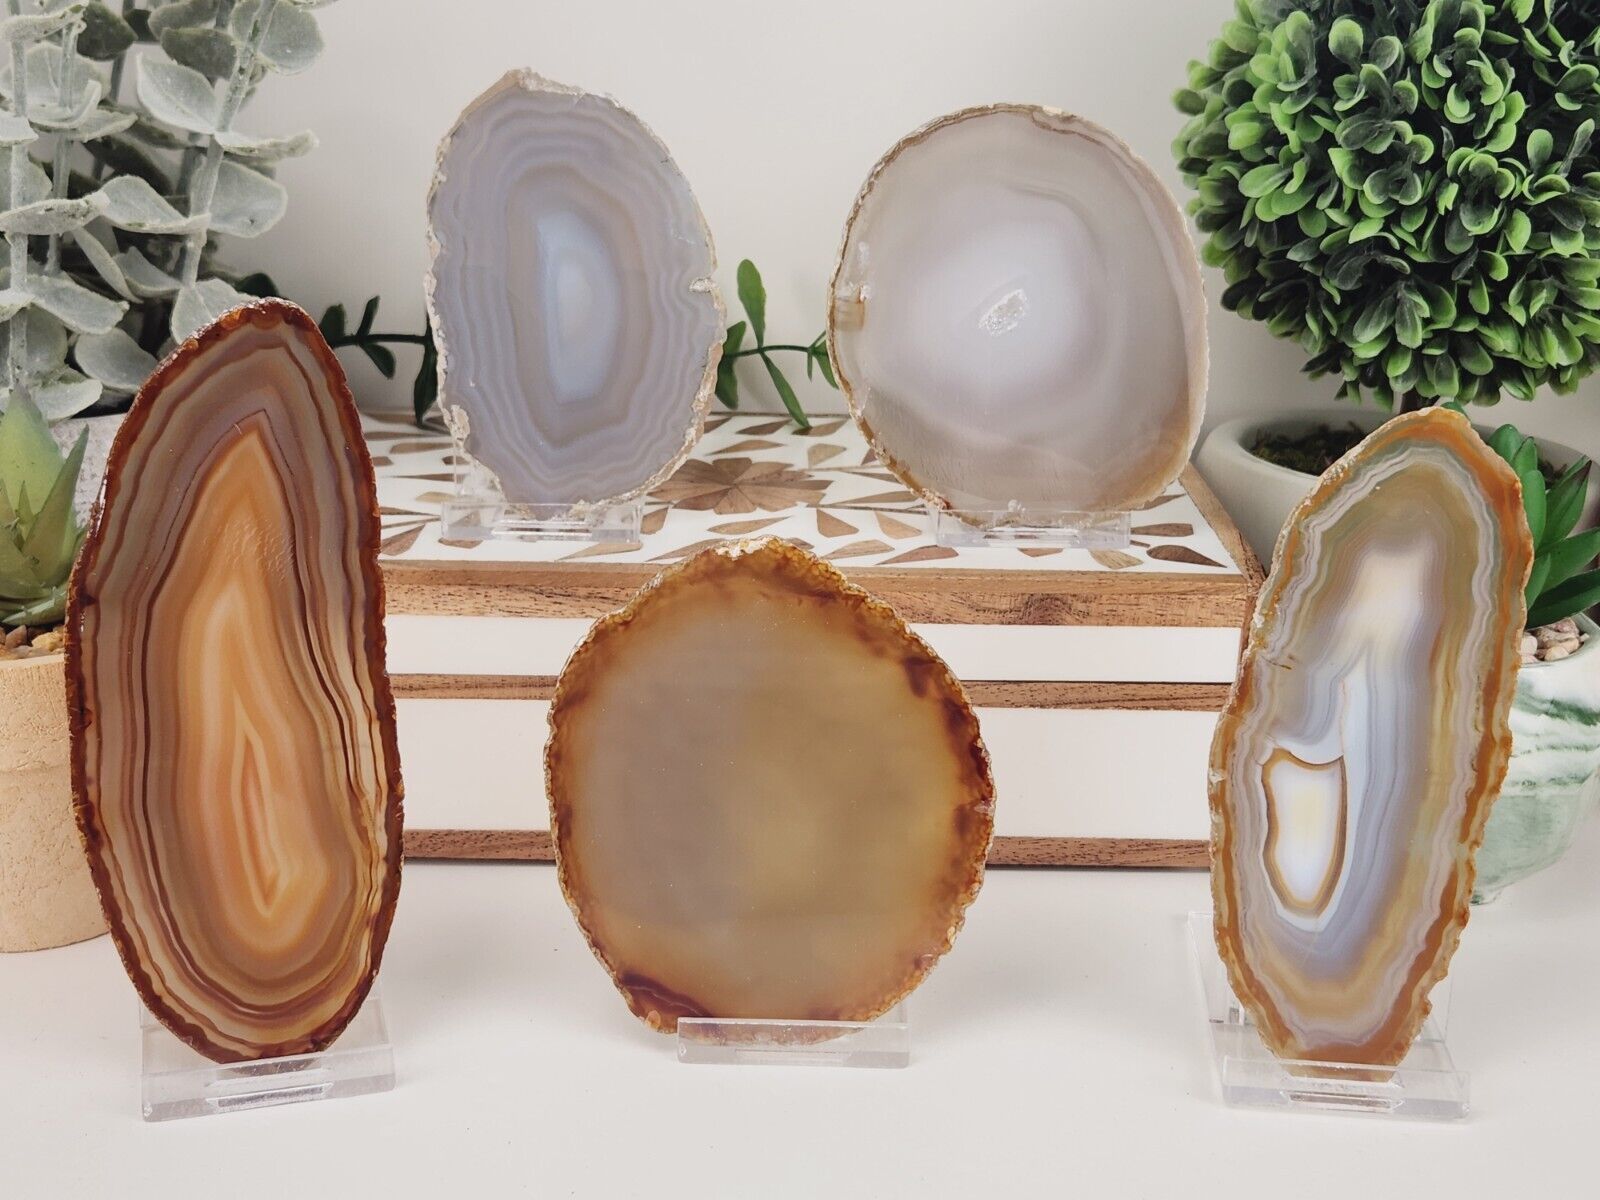 Natural Agate Slice Lot of 5 (Avg. 3.0-4.5 inches)